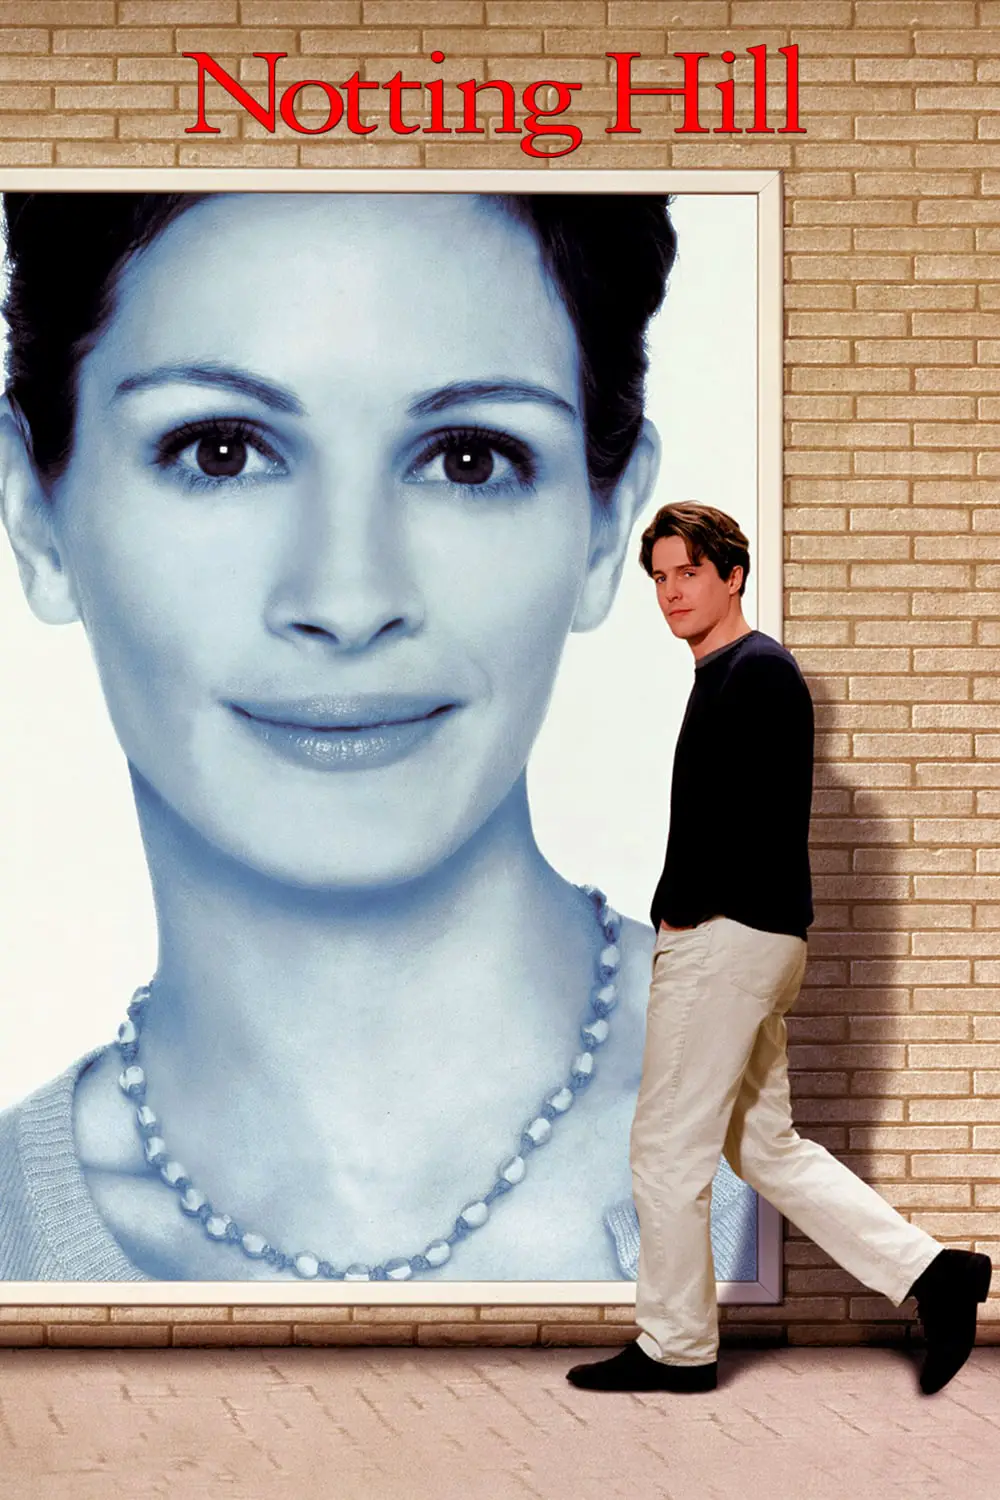 You are currently viewing Notting Hill